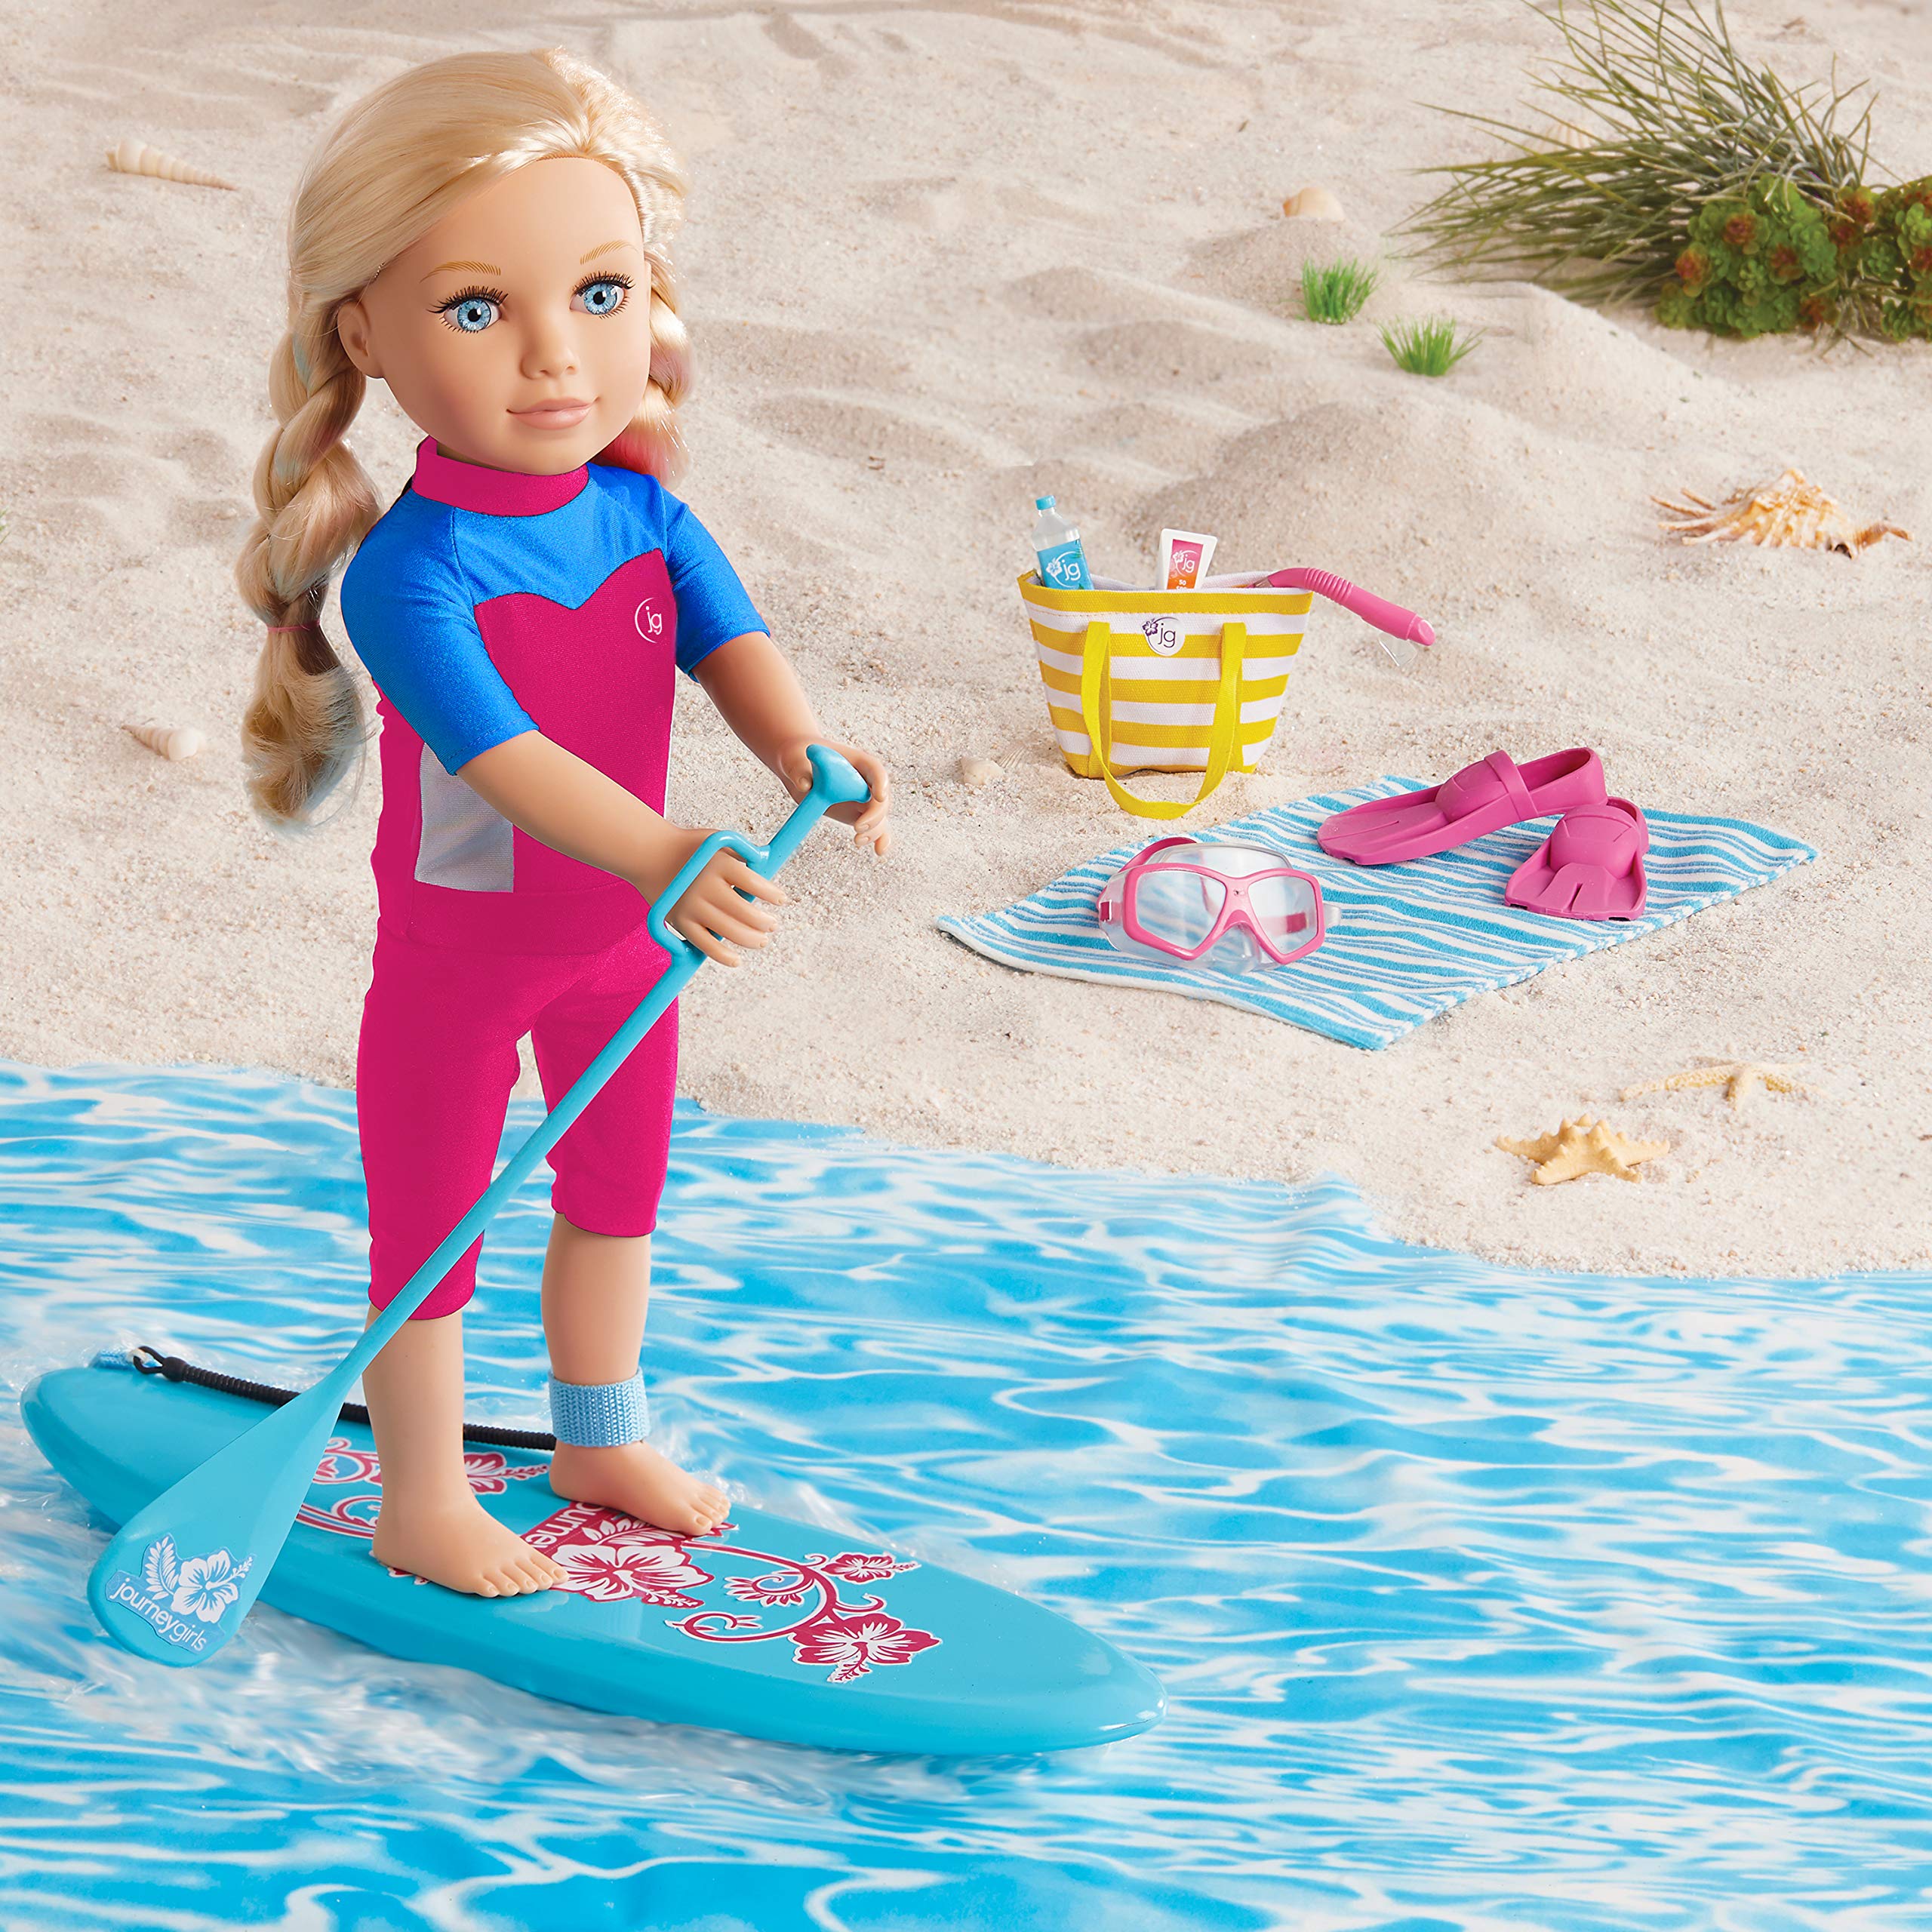 Journey Girls Summer Surf Set for 18 Inch Dolls, Includes Surfboard and Wet Suit, Kids Toys for Ages 6 Up by Just Play